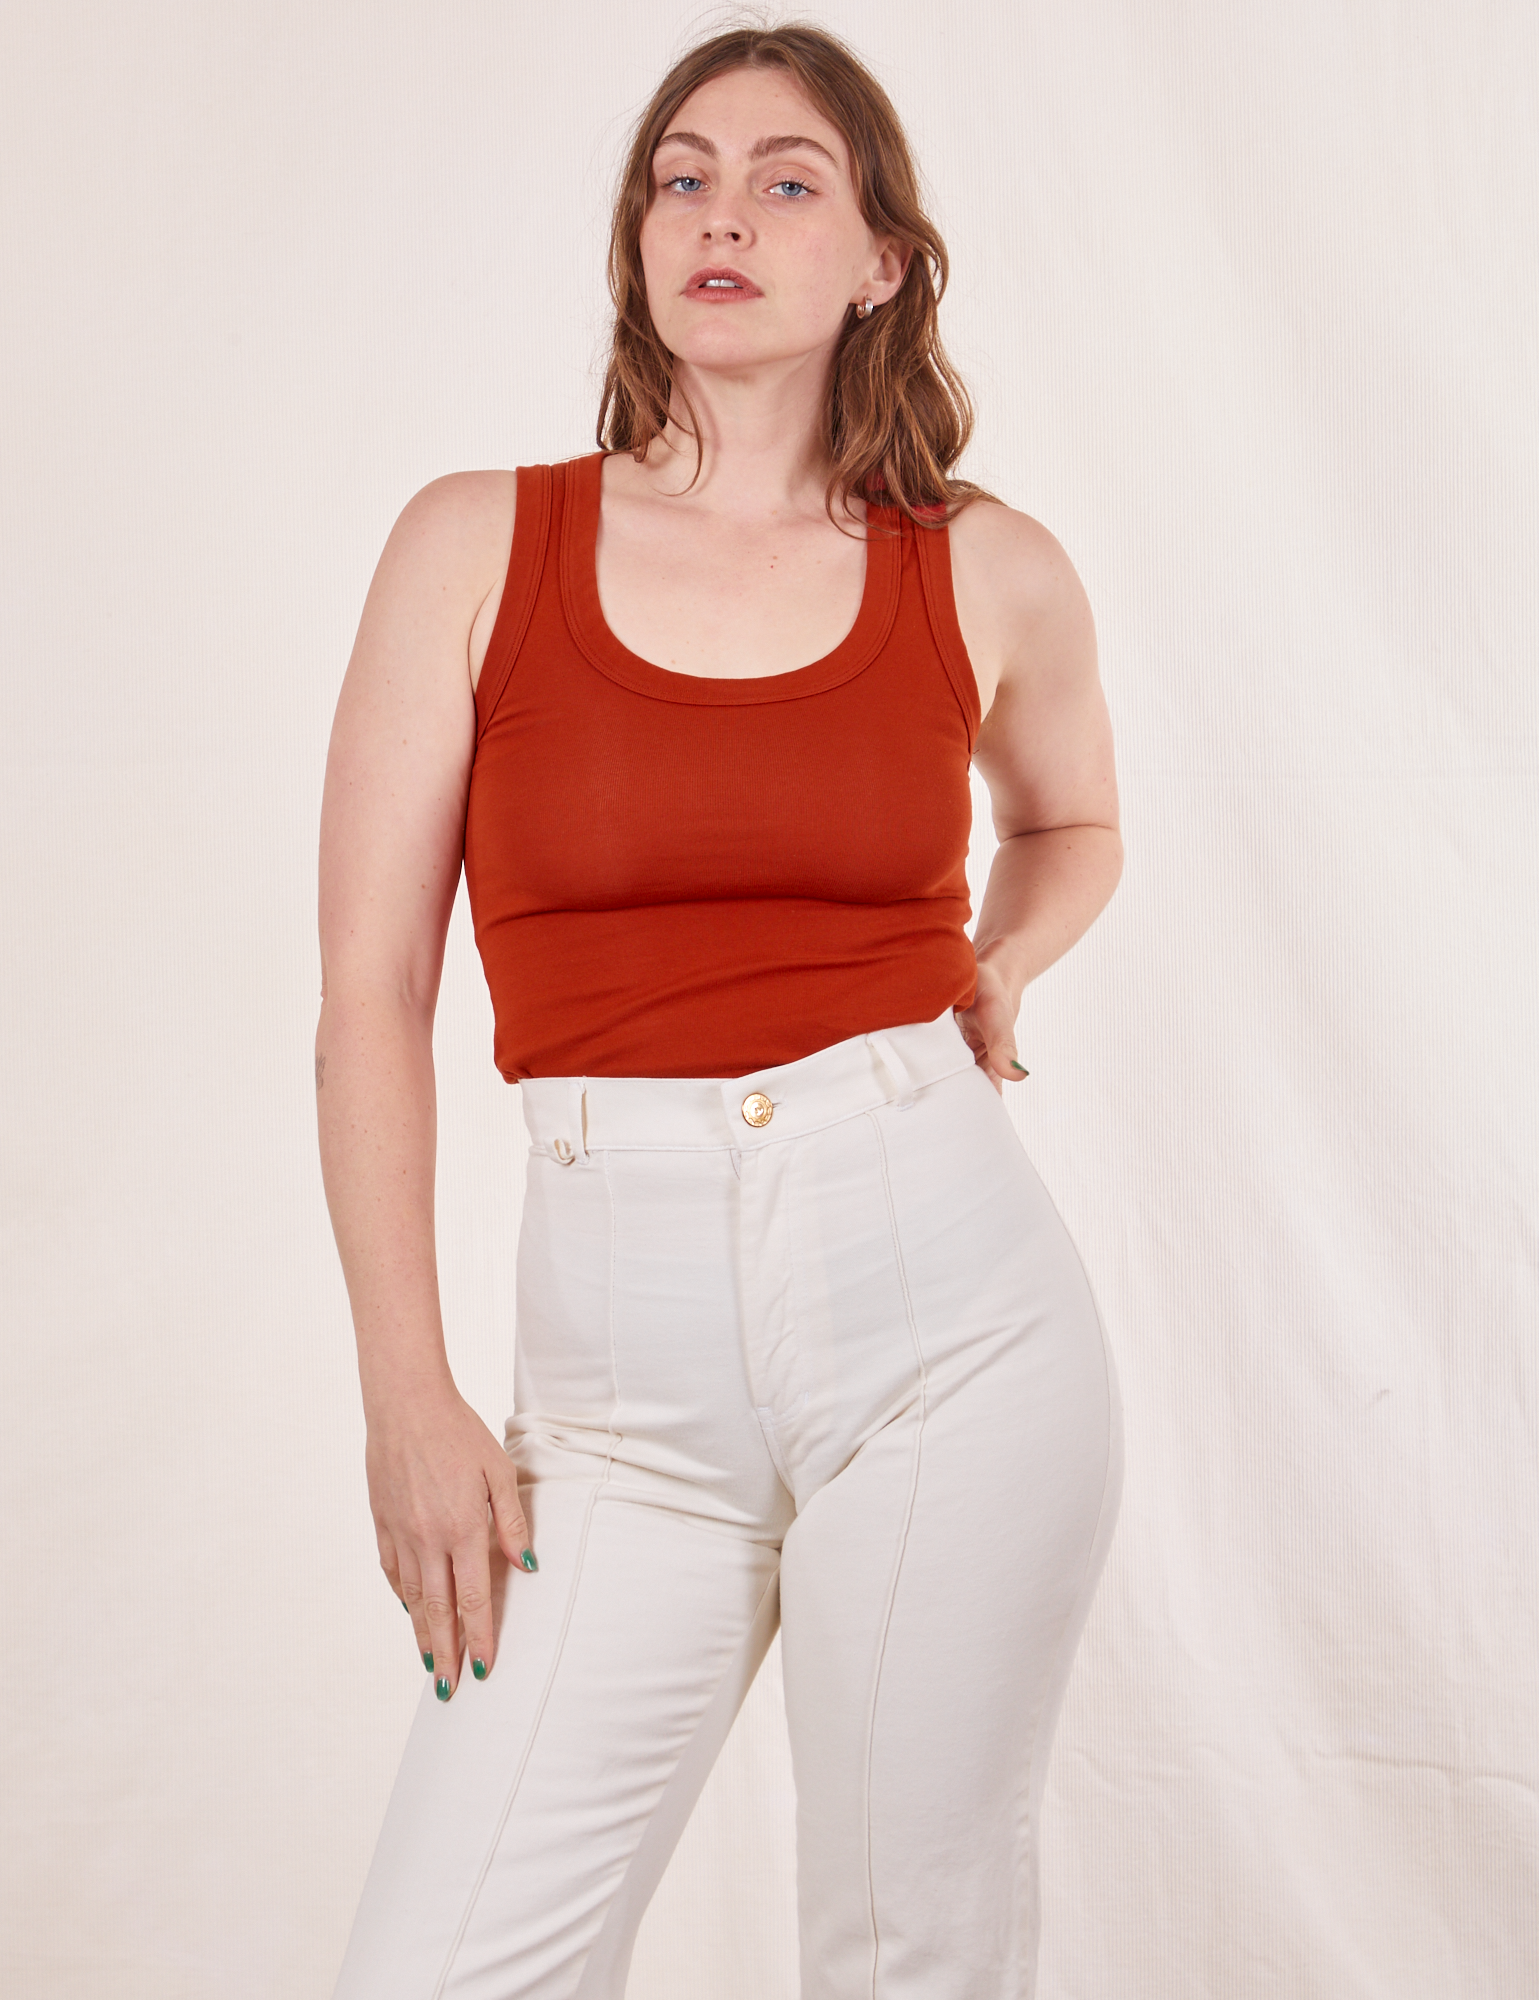 Allison is wearing size XXS Tank Top in Paprika paired with vintage tee off-white Western Pants